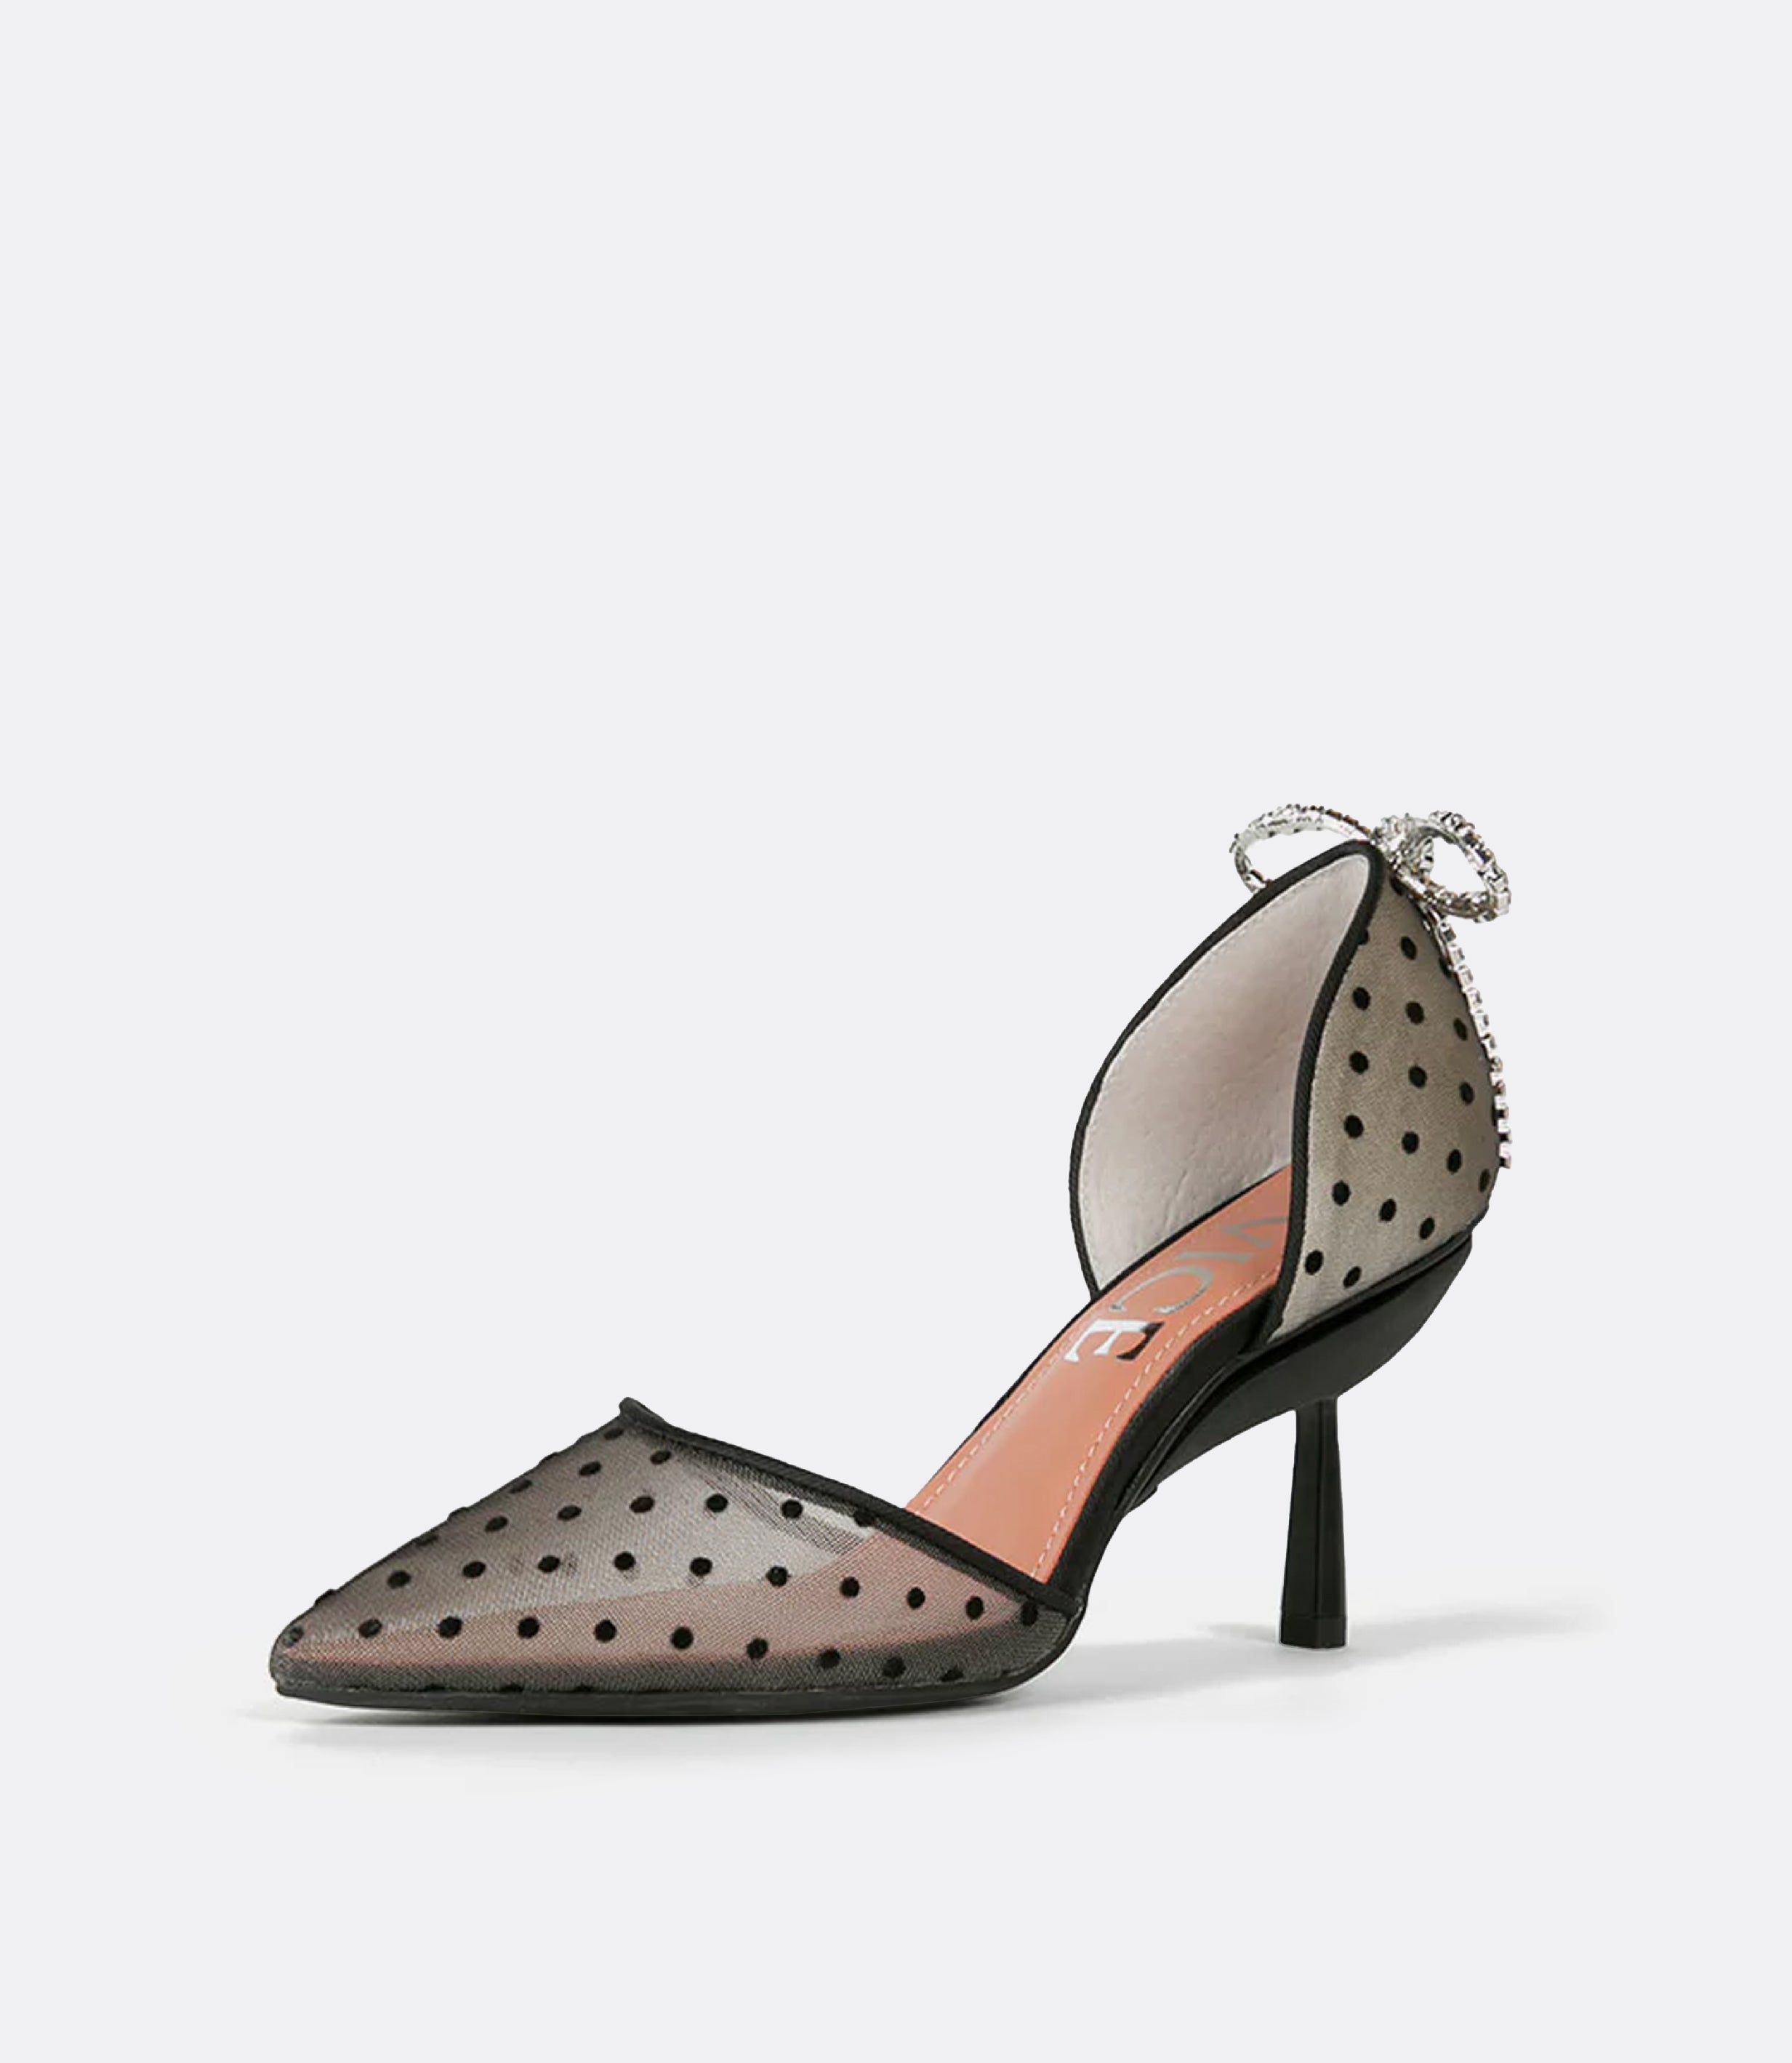 Front view of the black polkadot heel.